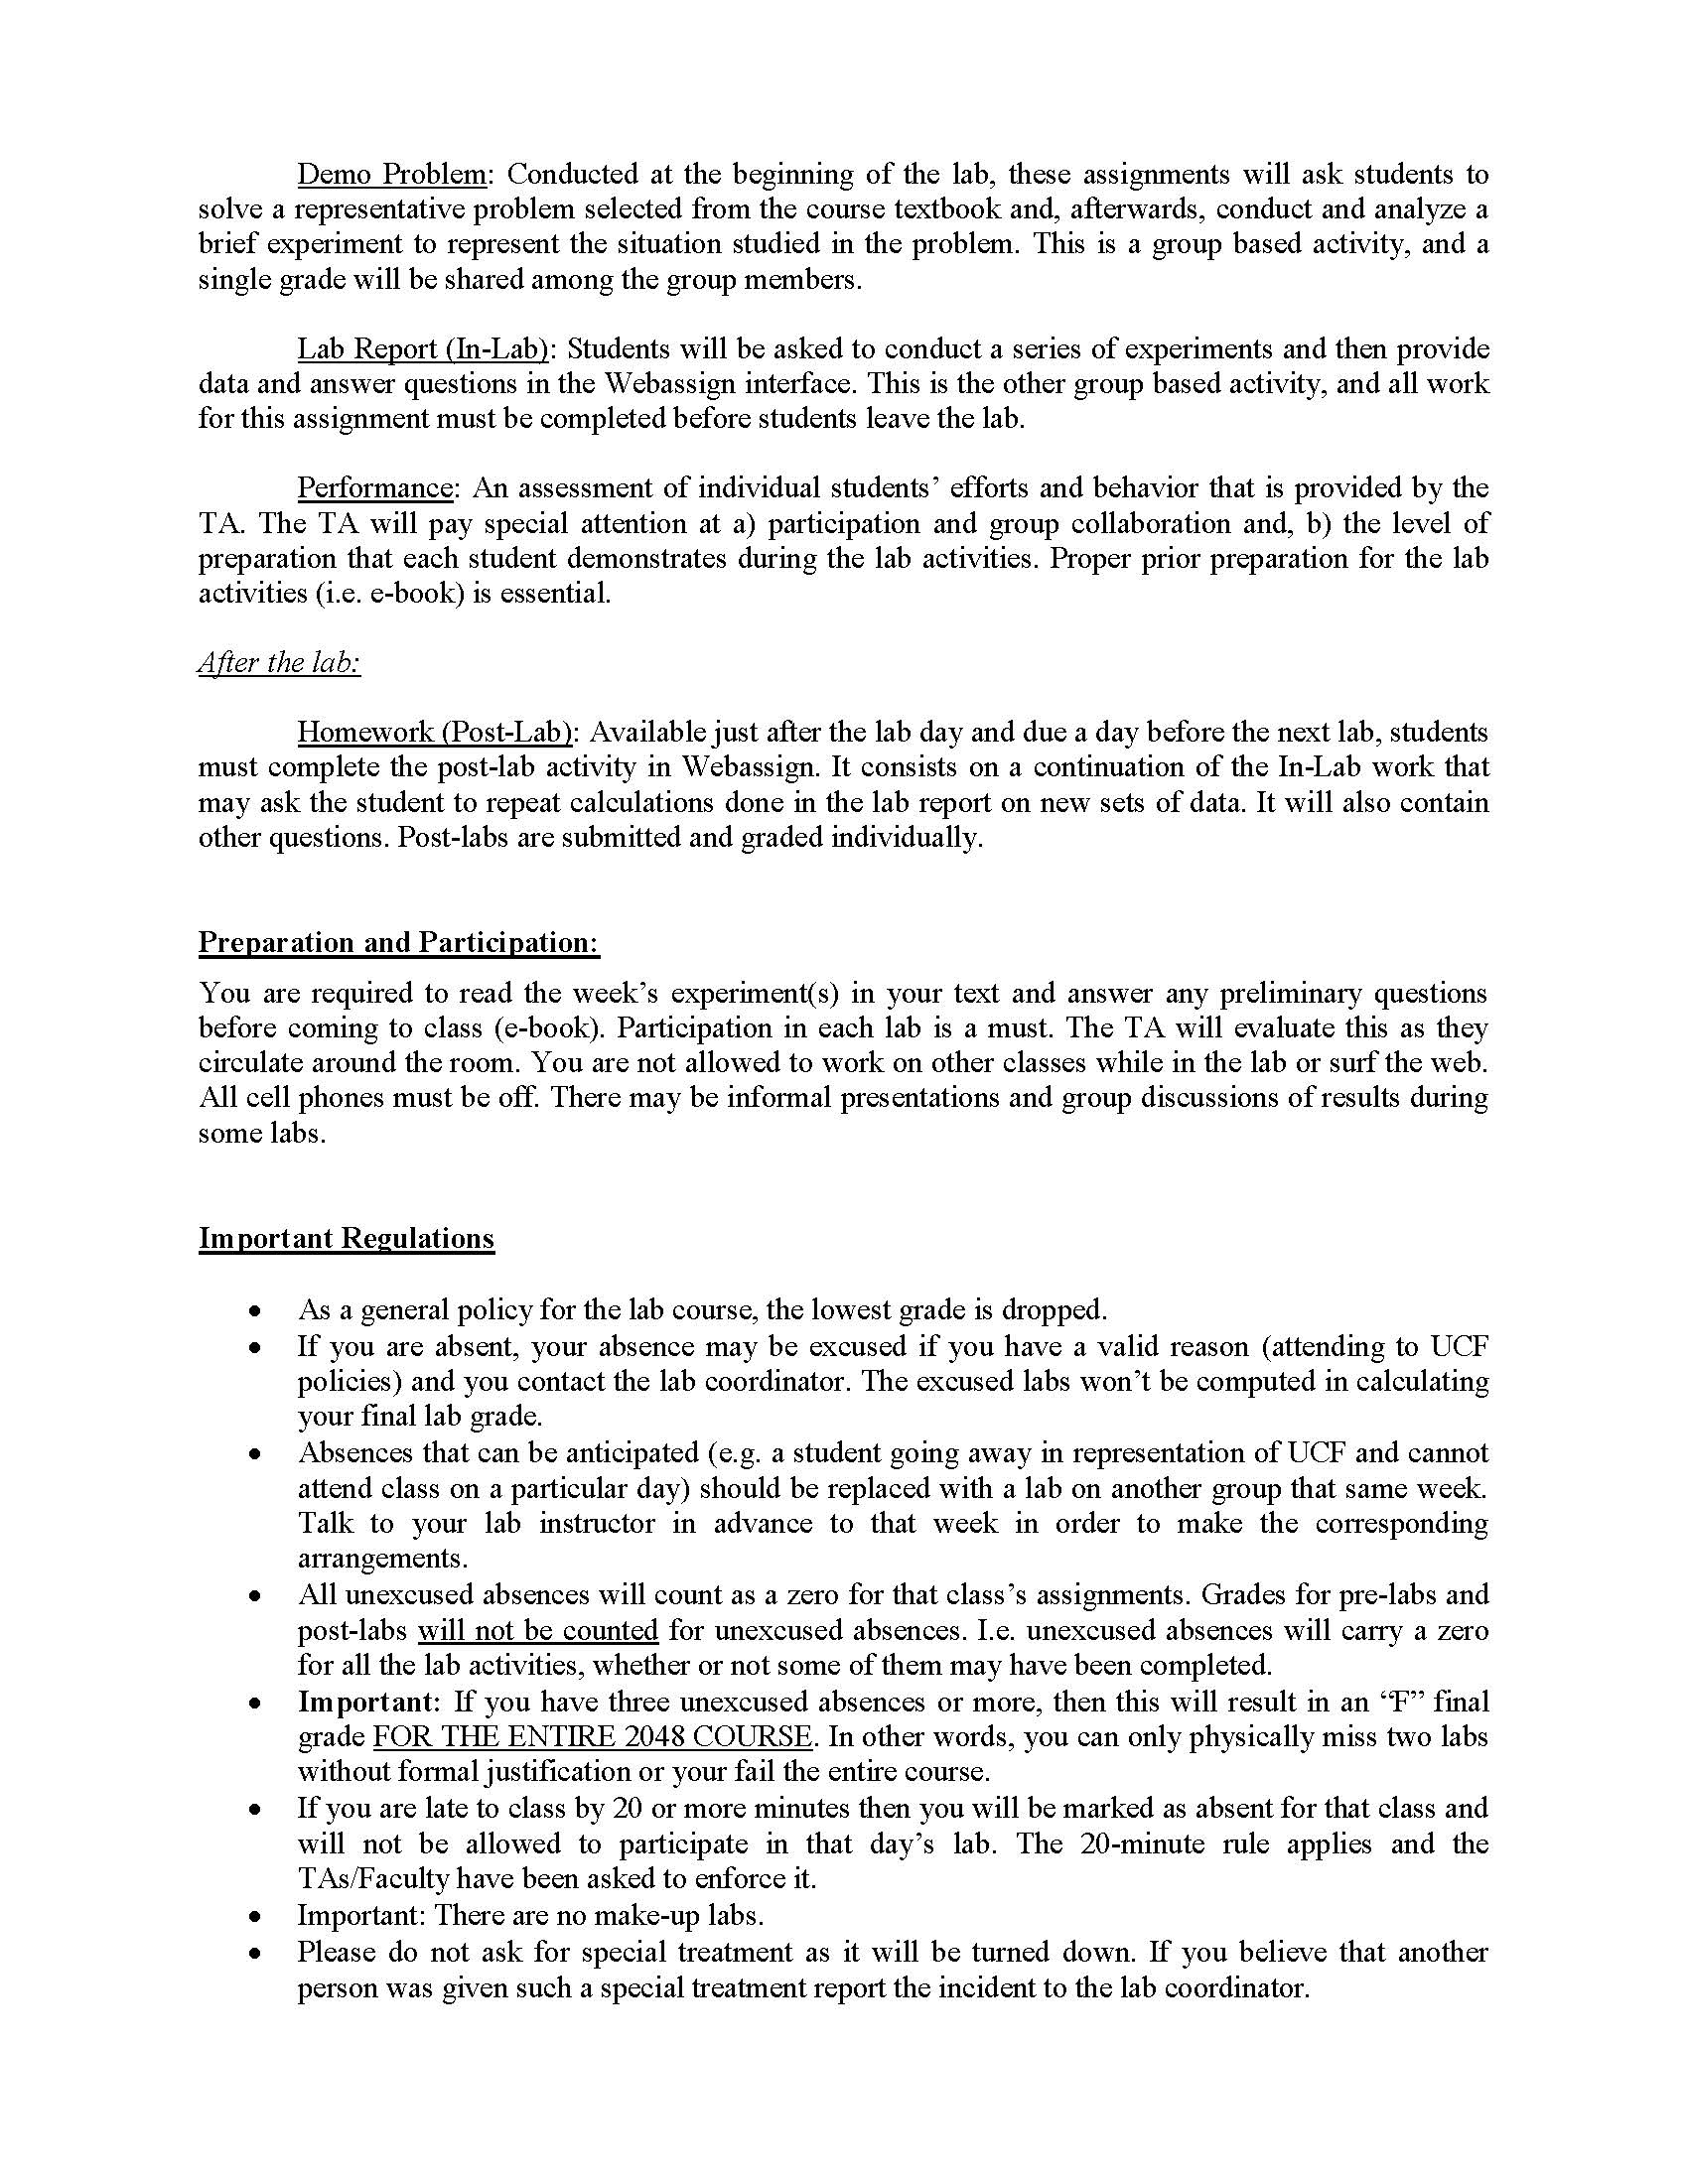 PHY2048L Section 0211 Syllabus page 2